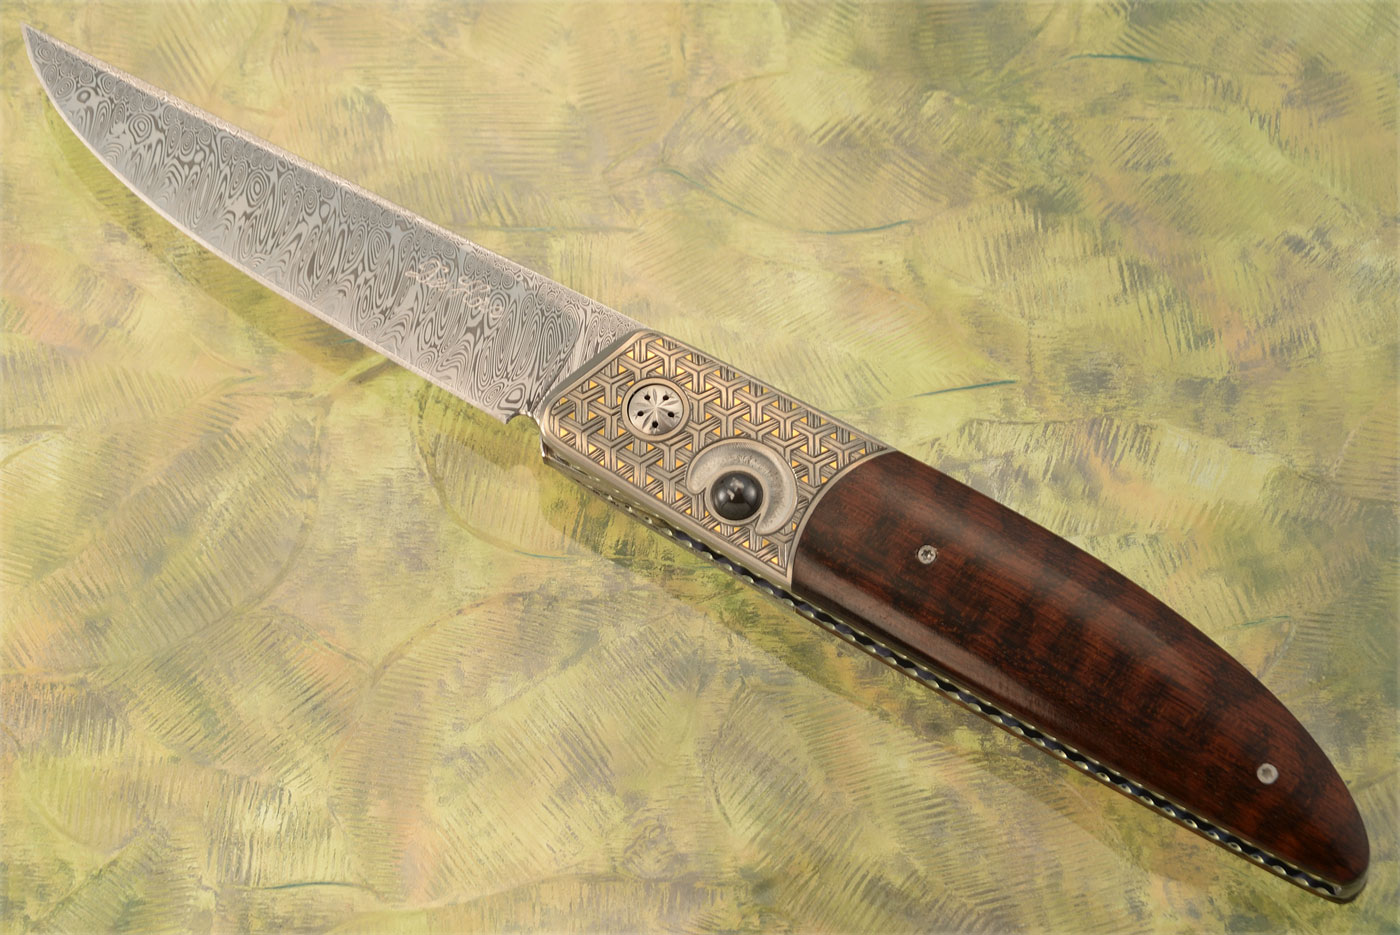 Large Ball Release Front Flipper with Snakewood and Engraved Zirconium